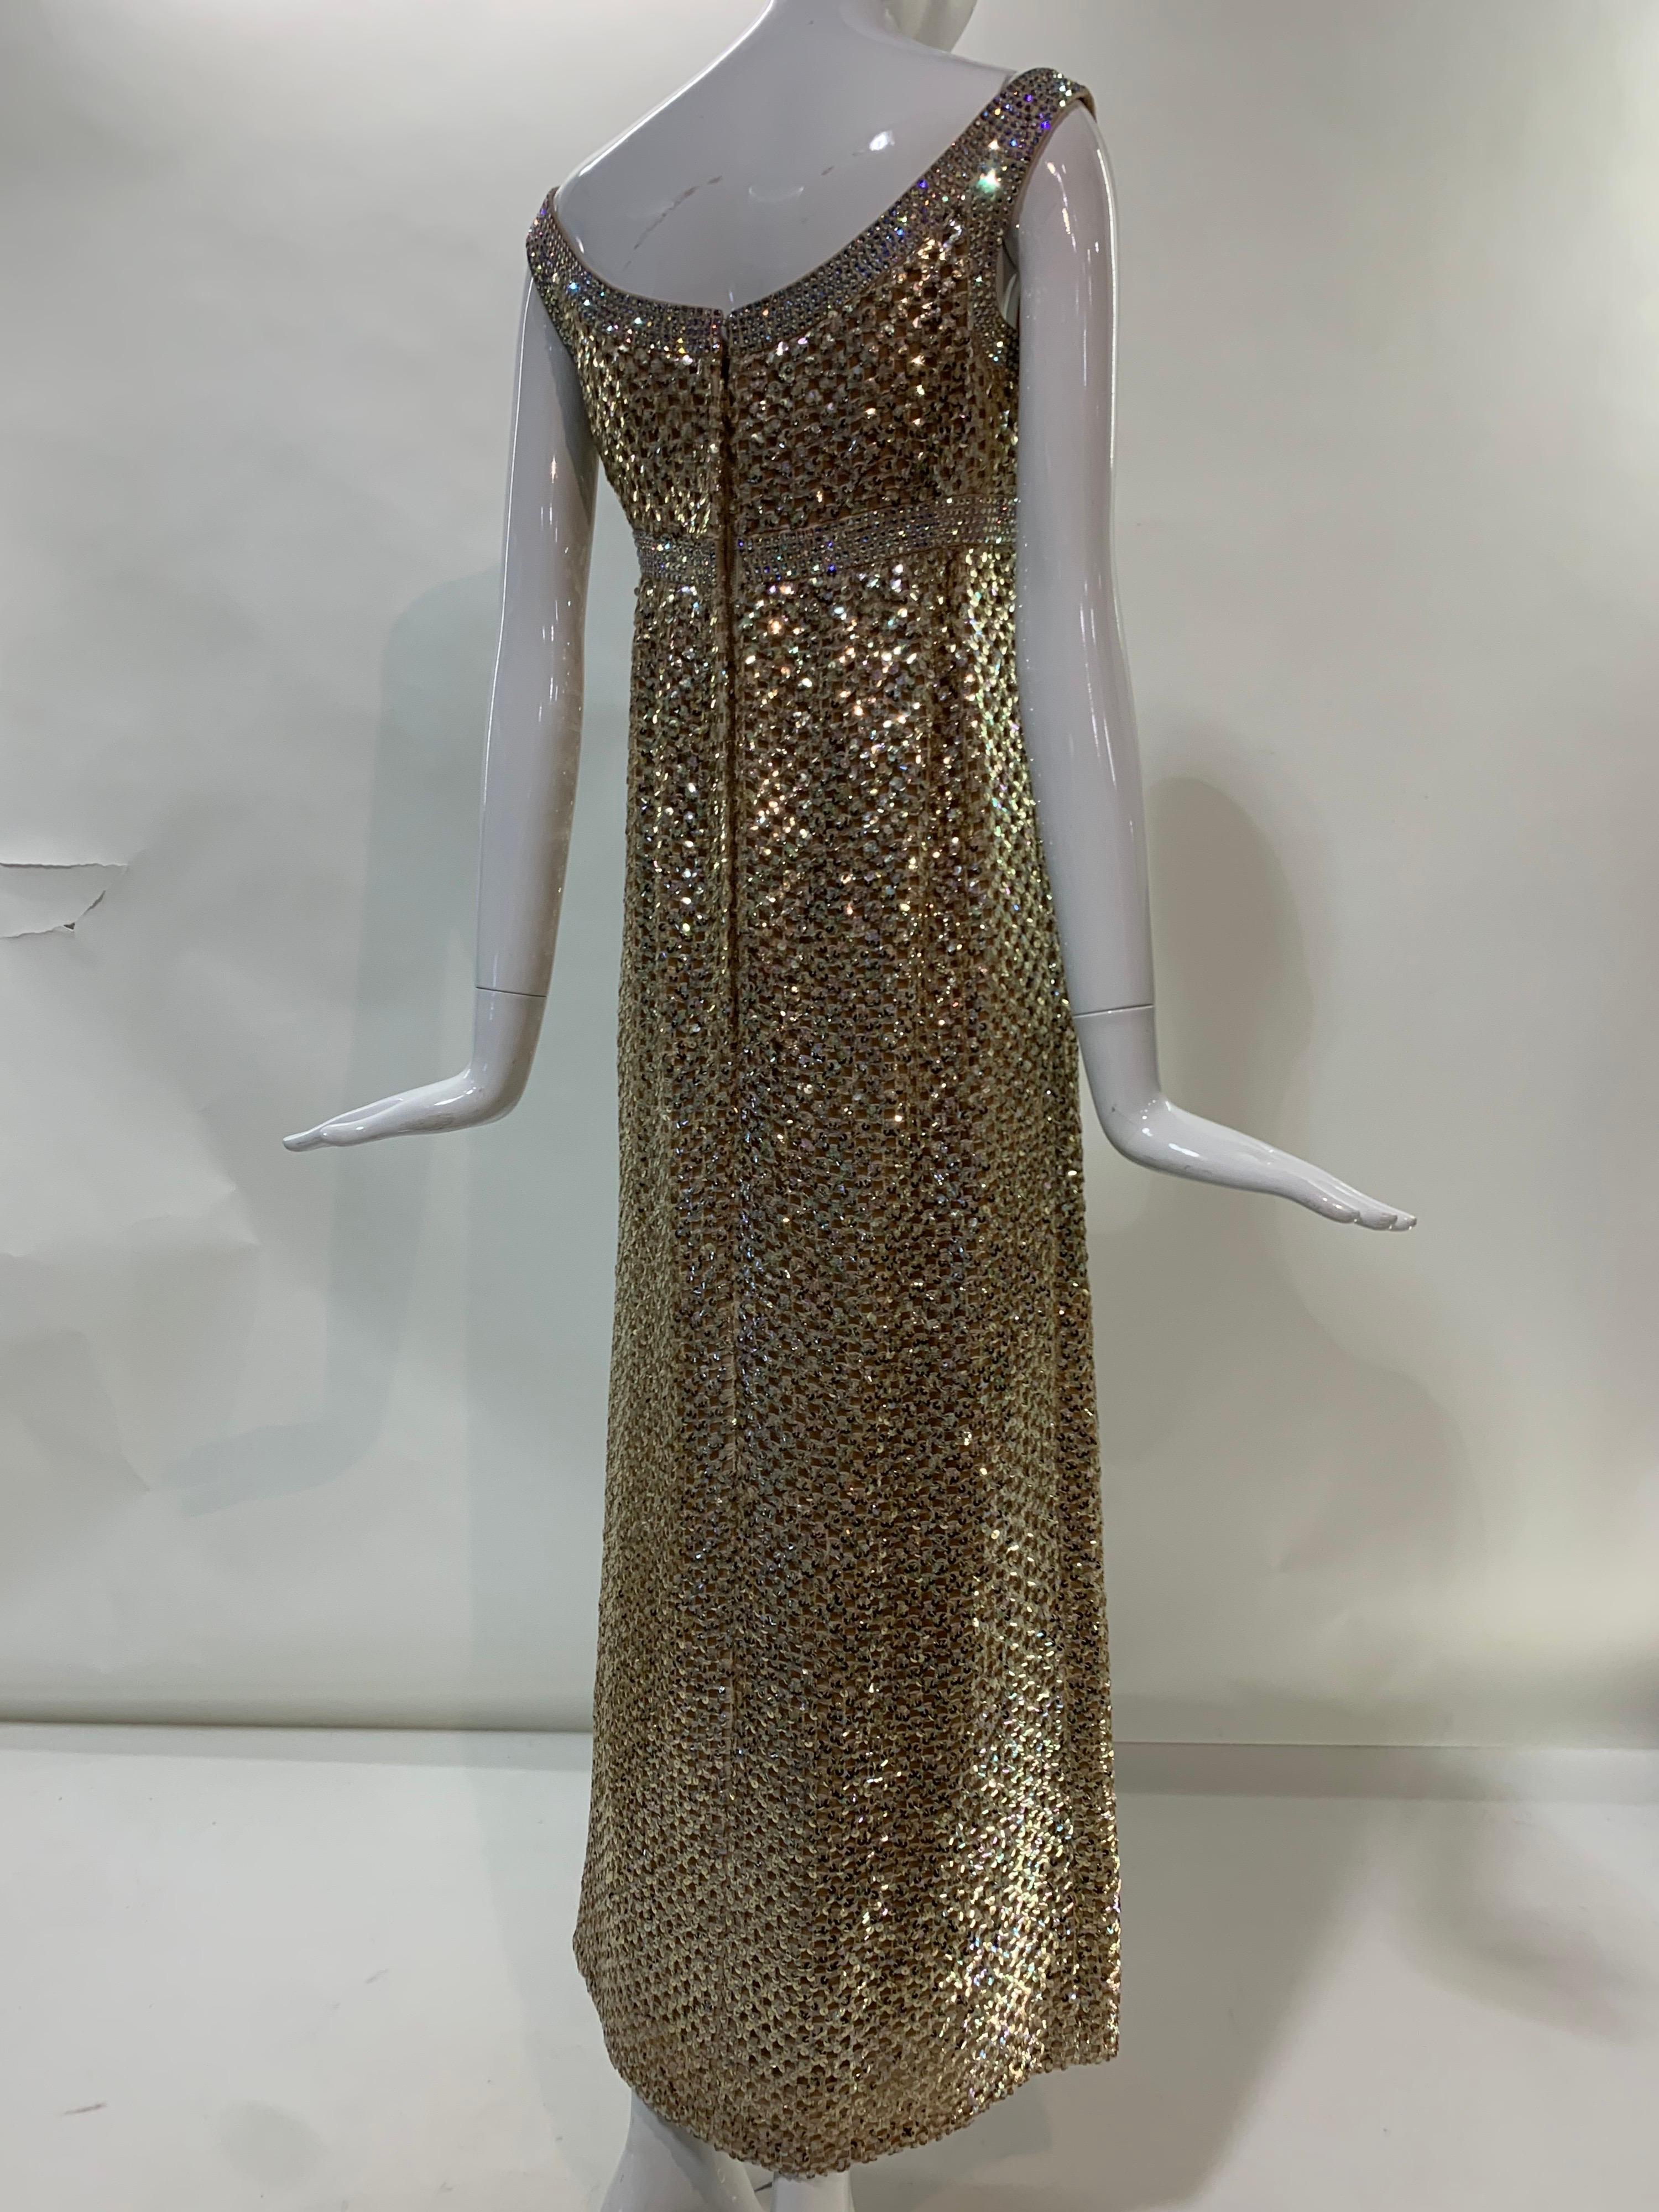 1960s Mod Empire Waist Gown in Gold Sequin Lattice and Iridescent Rhinestones For Sale 5